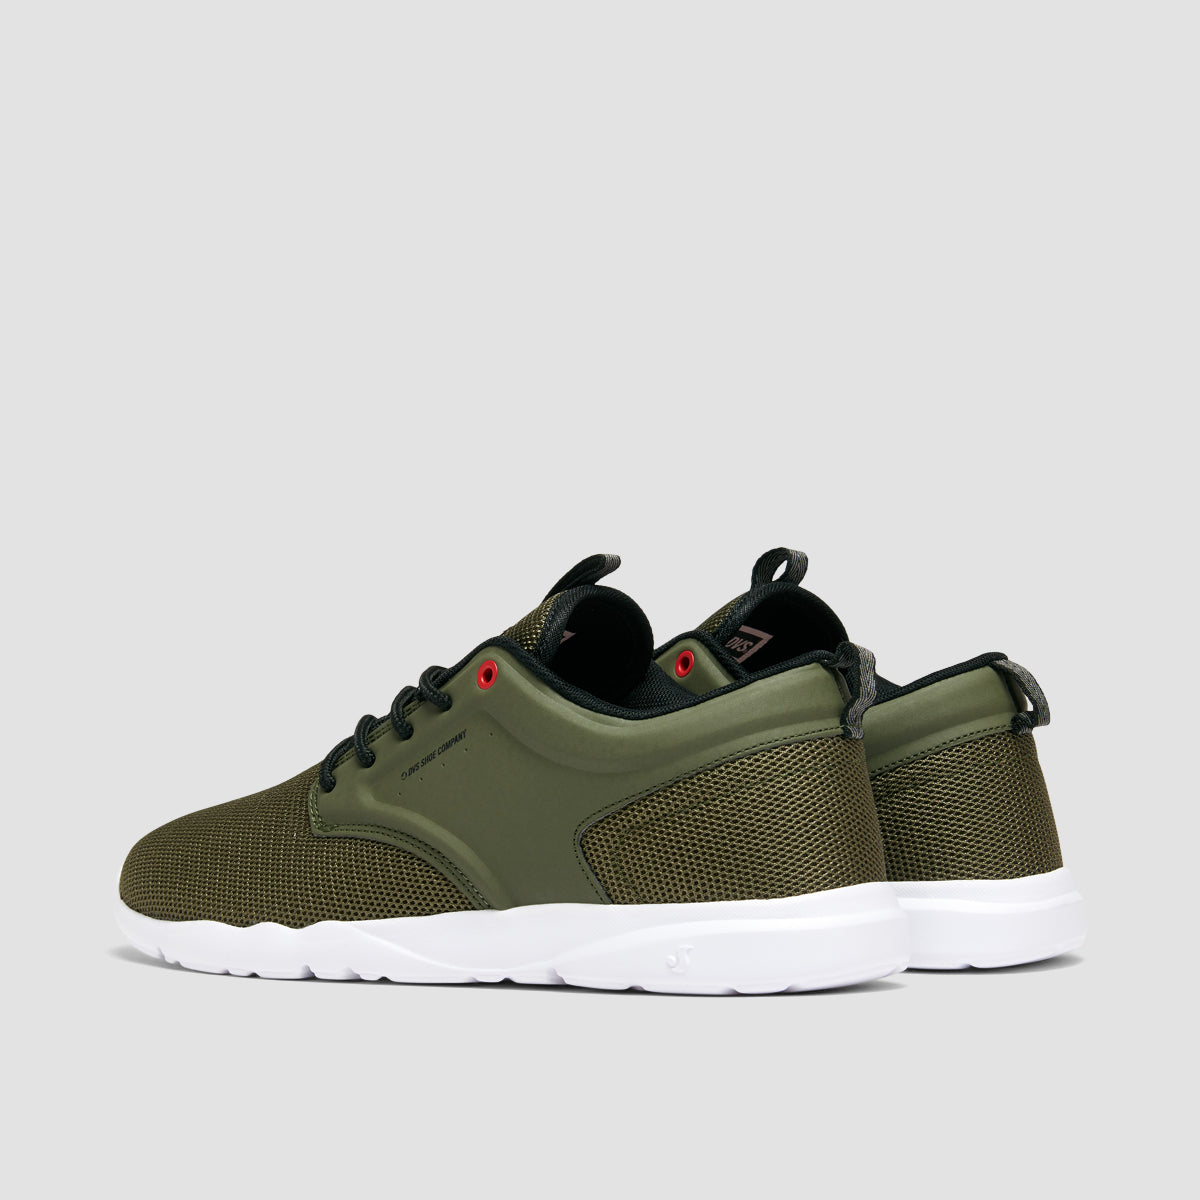 DVS Premier 2.0+ Shoes - Olive Mesh/Fiery Red